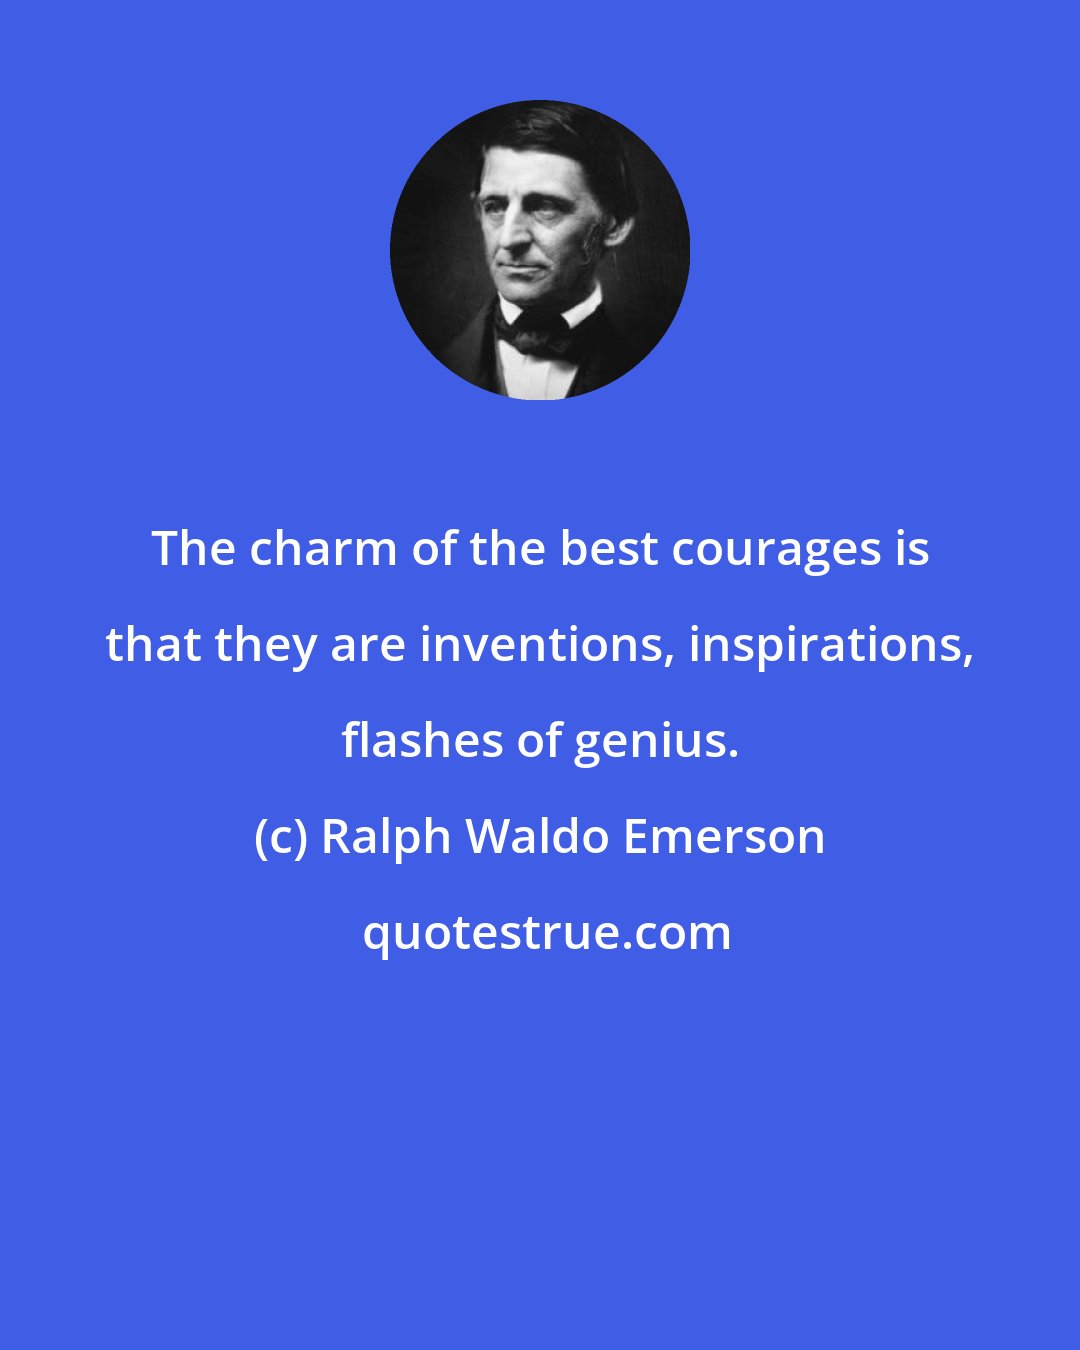 Ralph Waldo Emerson: The charm of the best courages is that they are inventions, inspirations, flashes of genius.